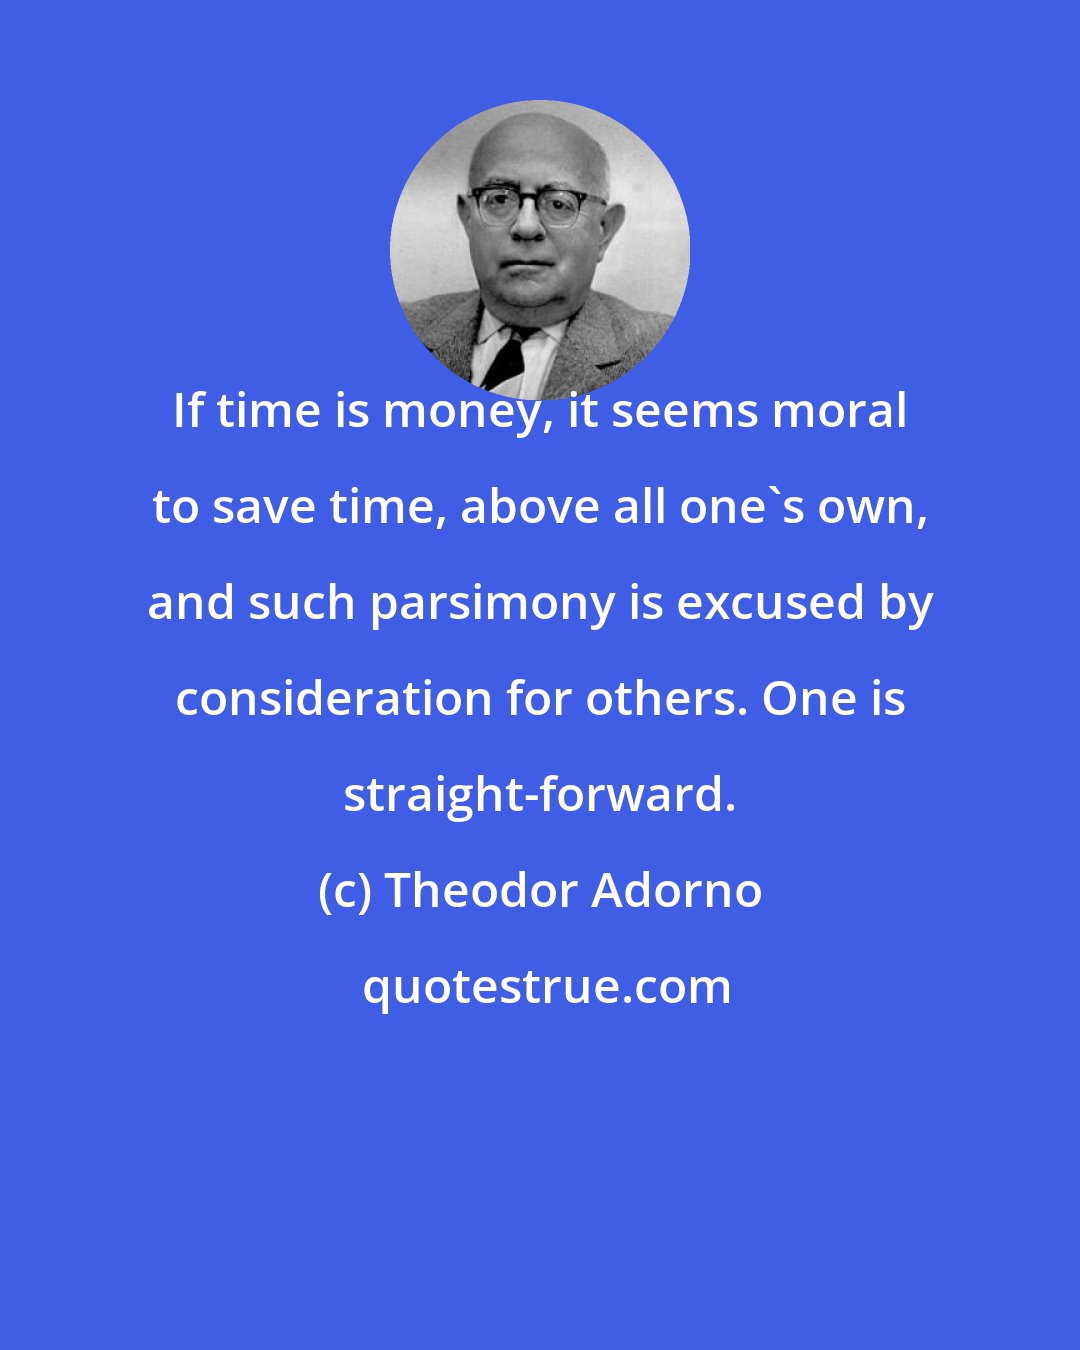 Theodor Adorno: If time is money, it seems moral to save time, above all one's own, and such parsimony is excused by consideration for others. One is straight-forward.